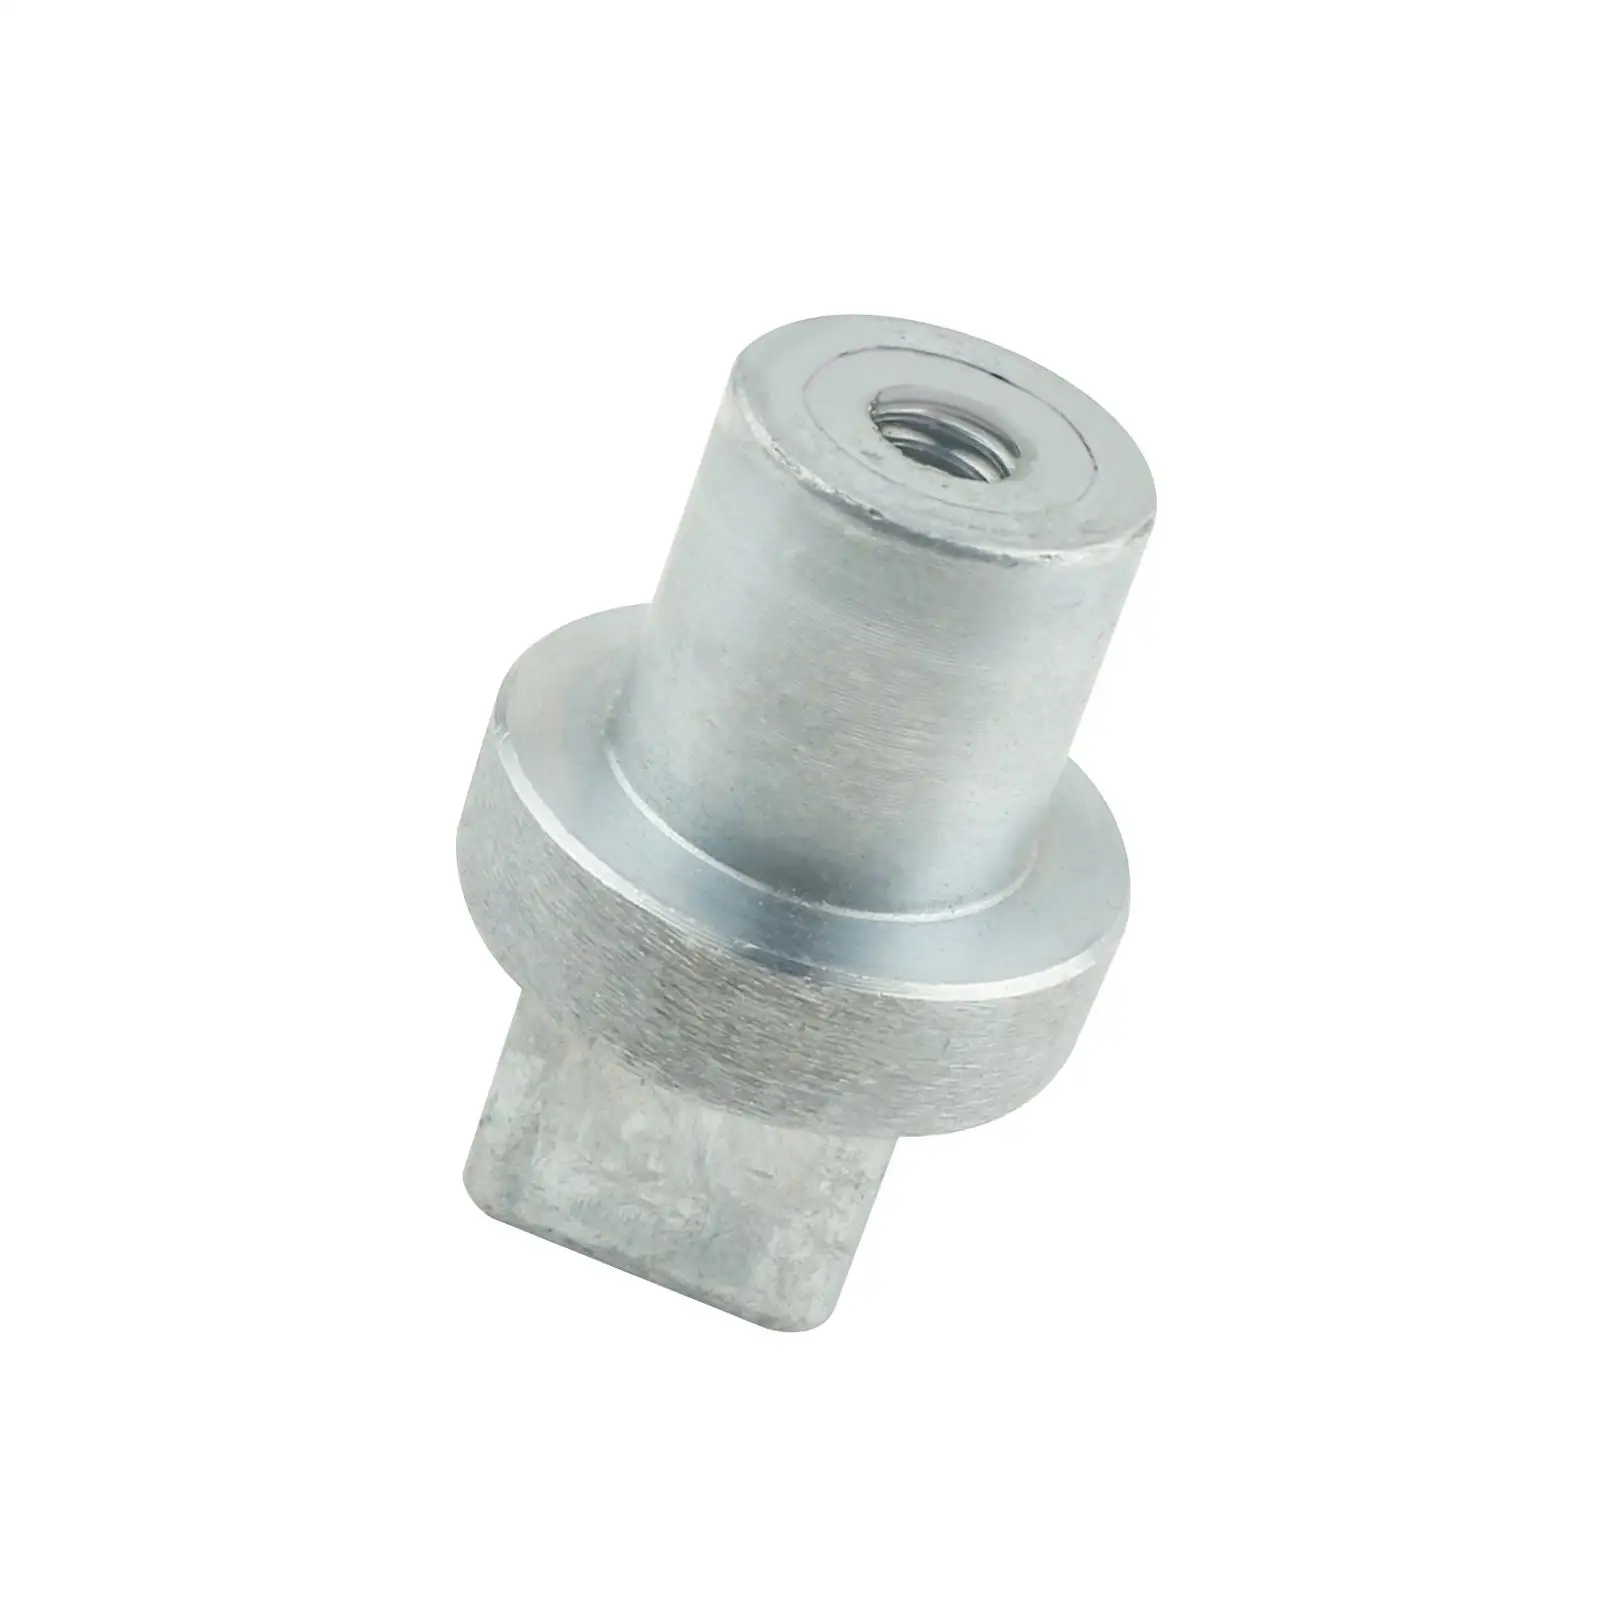 Boat Outboard Motor Protection Anode 67F-45251-01 Cylinder Marine Boat Zinc Anode for Yamaha 4 Stroke 80HP 100HP 200 HP